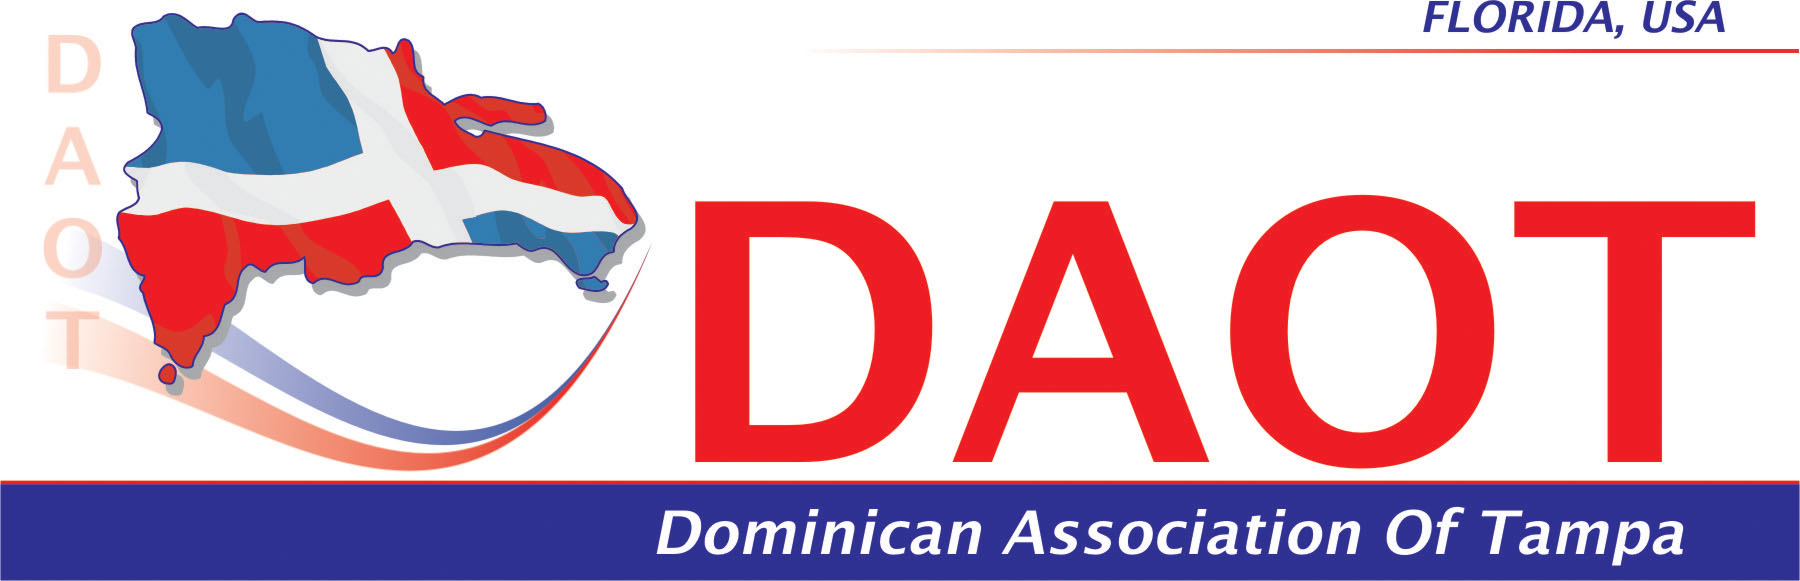 Dominican Association of Tampa (DAOT)